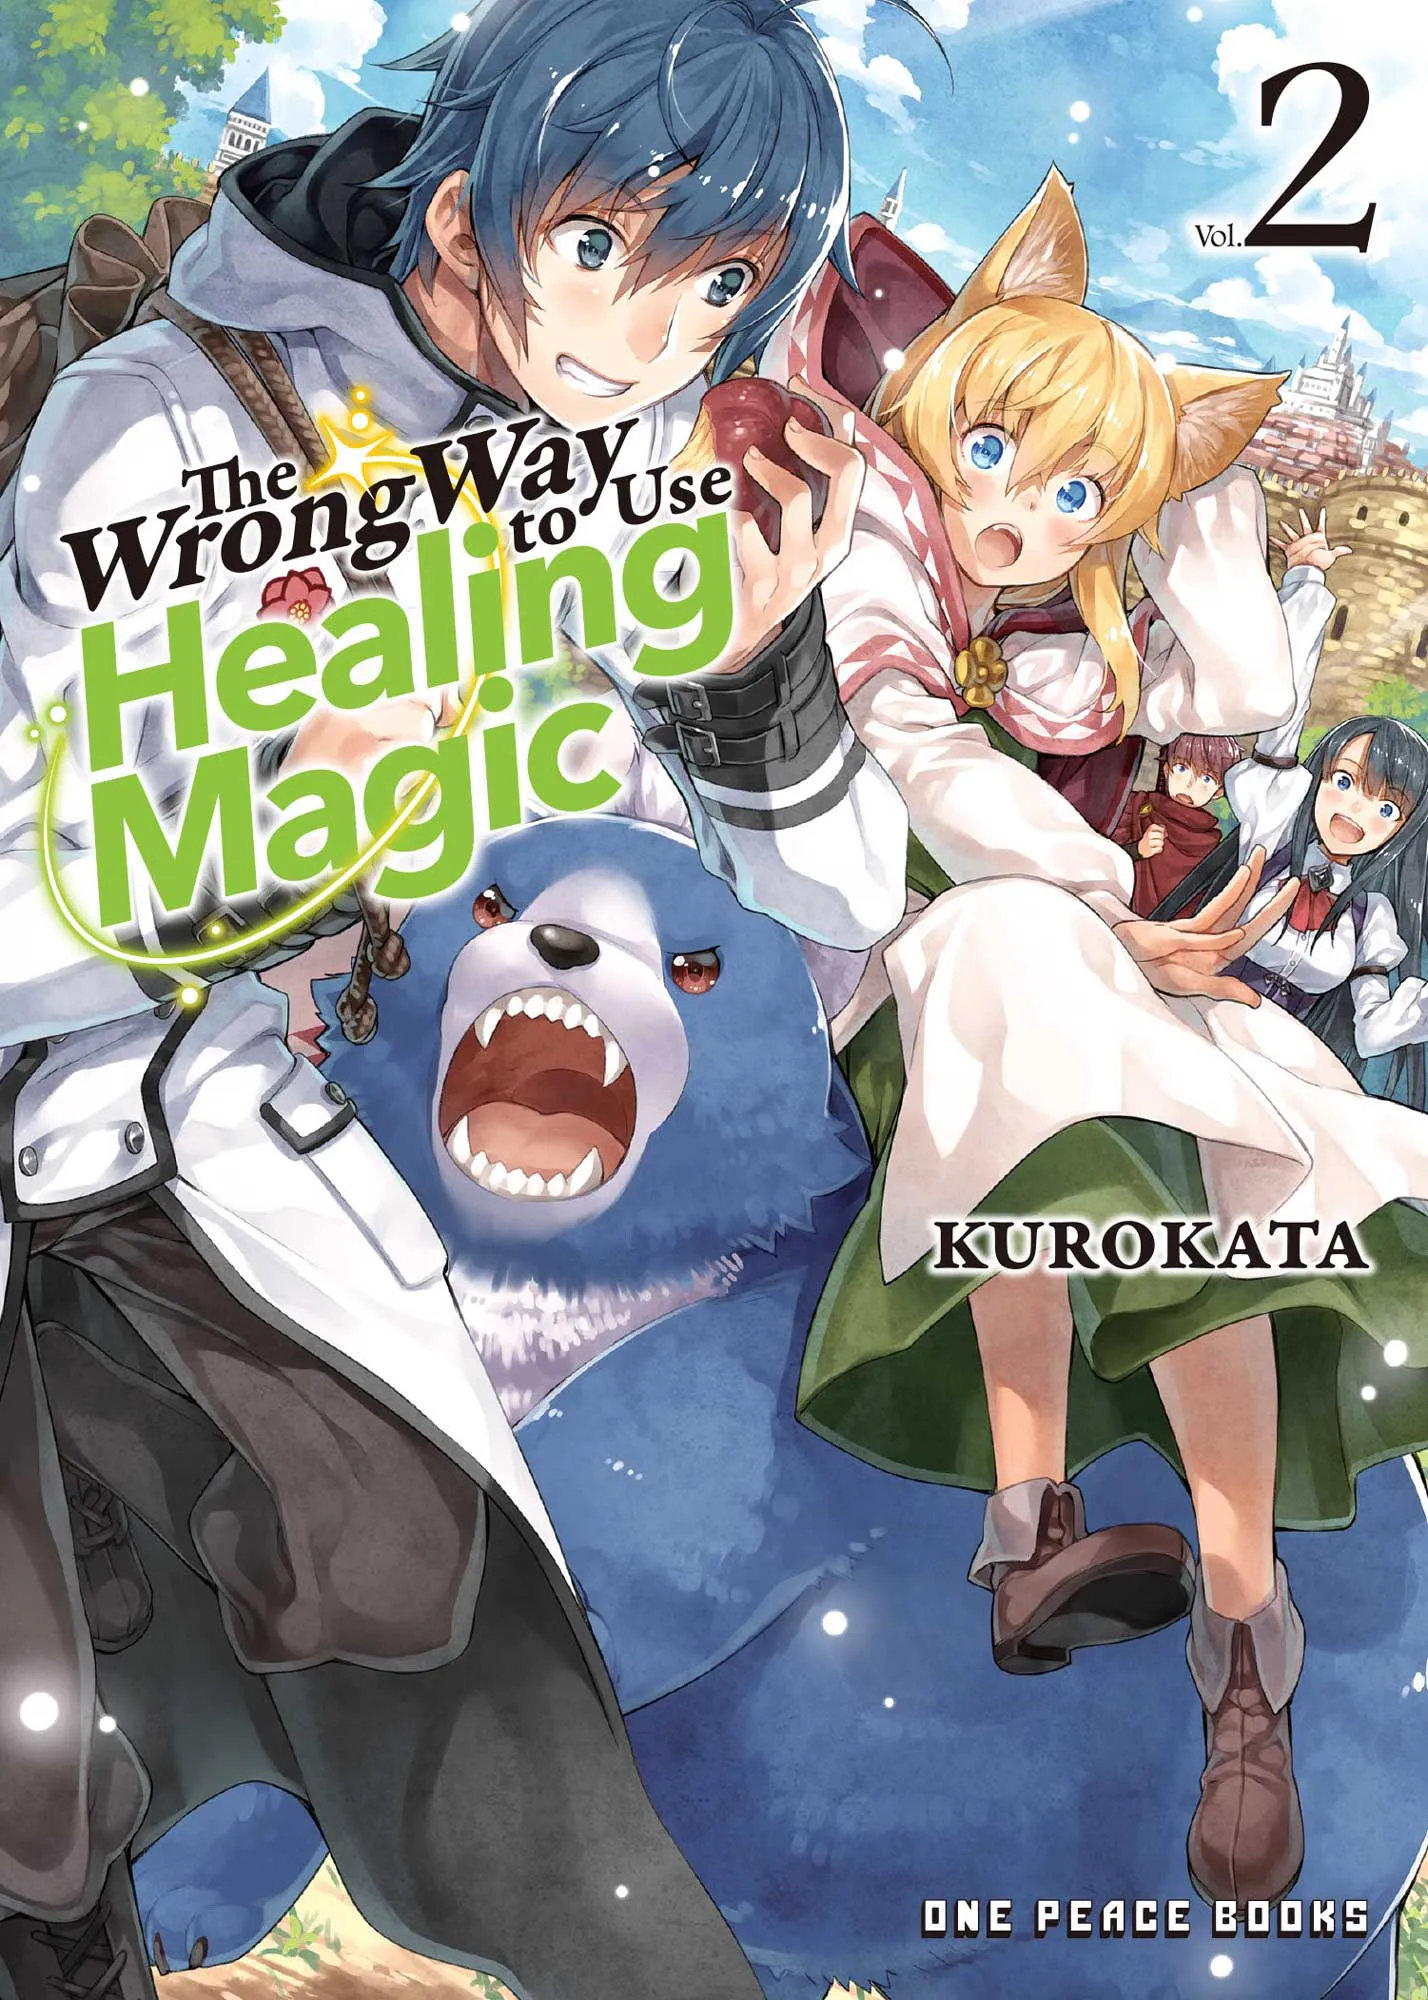 The Wrong Way to Use Healing Magic Volume 2 (The Wrong Way to Use Healing Magic #2)